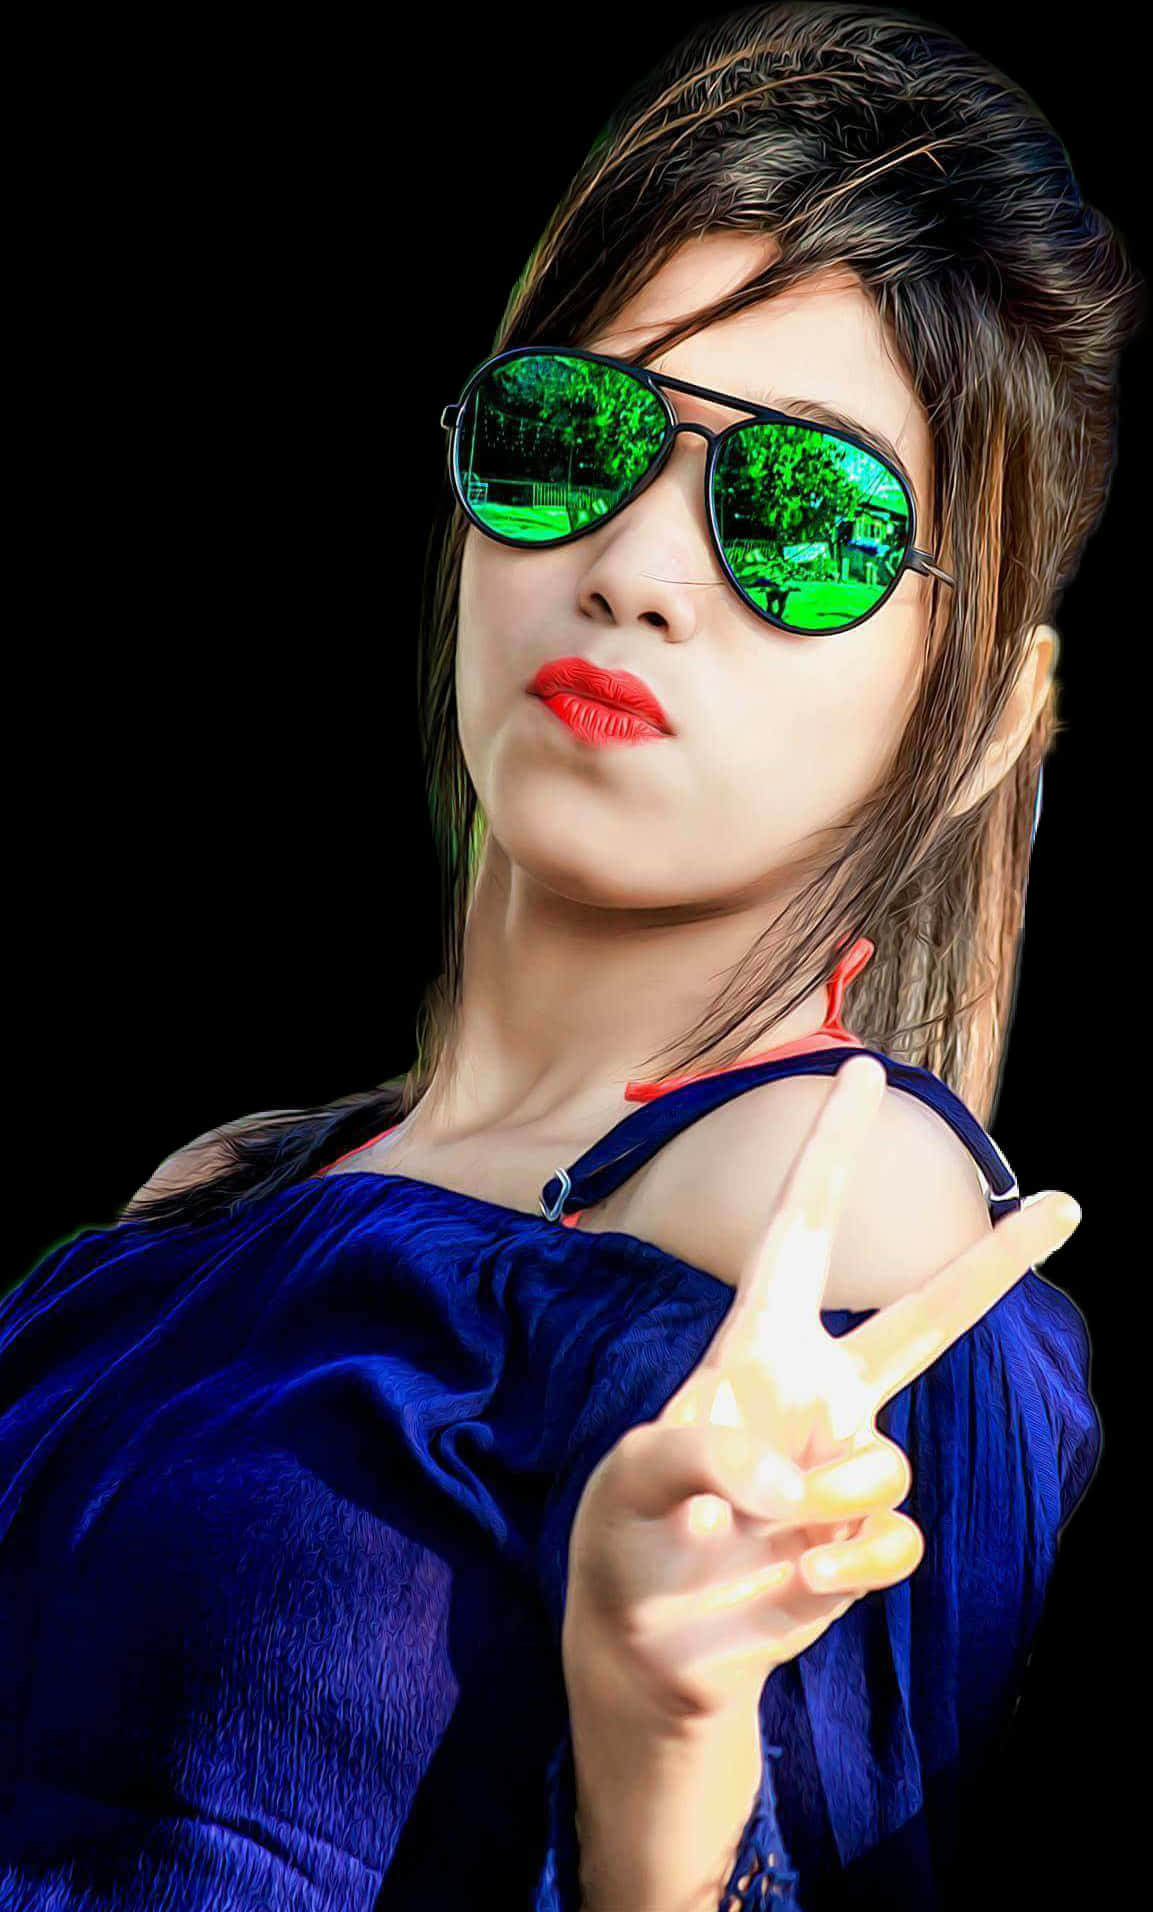 A Woman Wearing Sunglasses And Blue Top Making A Peace Sign